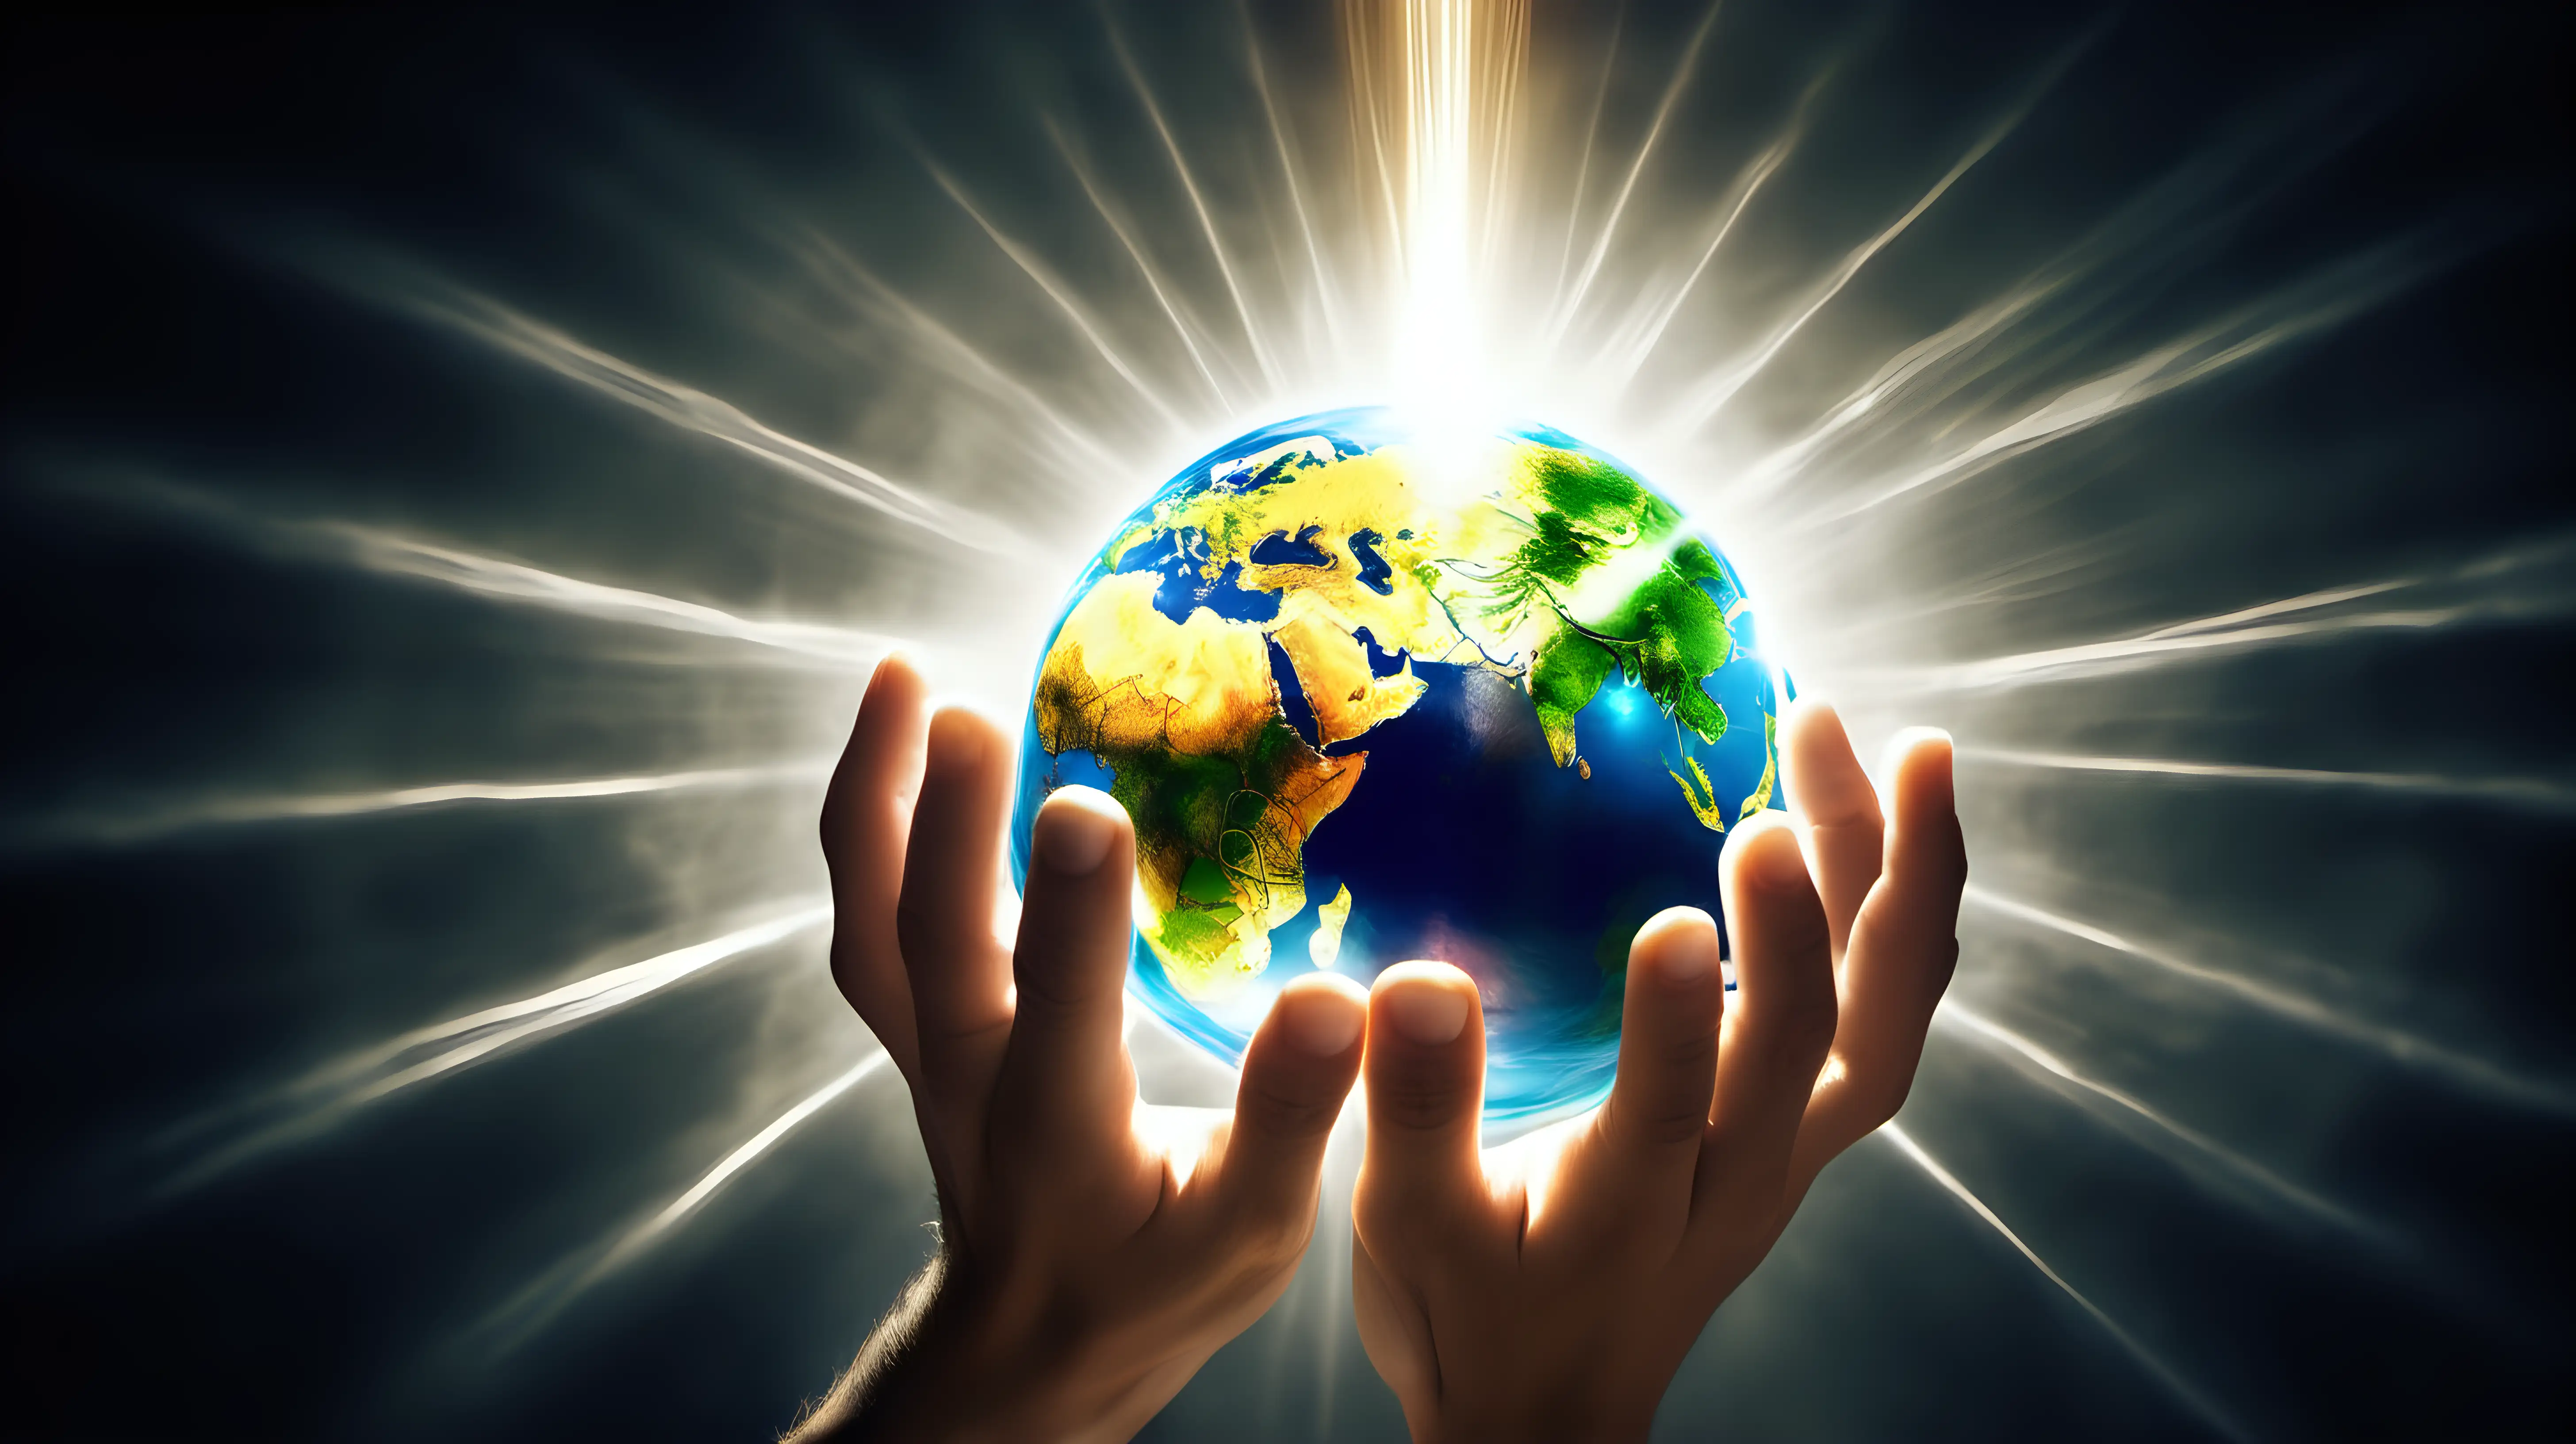 A dramatic image of hands releasing a world sphere with beams of light extending outward, signifying positive global impact.